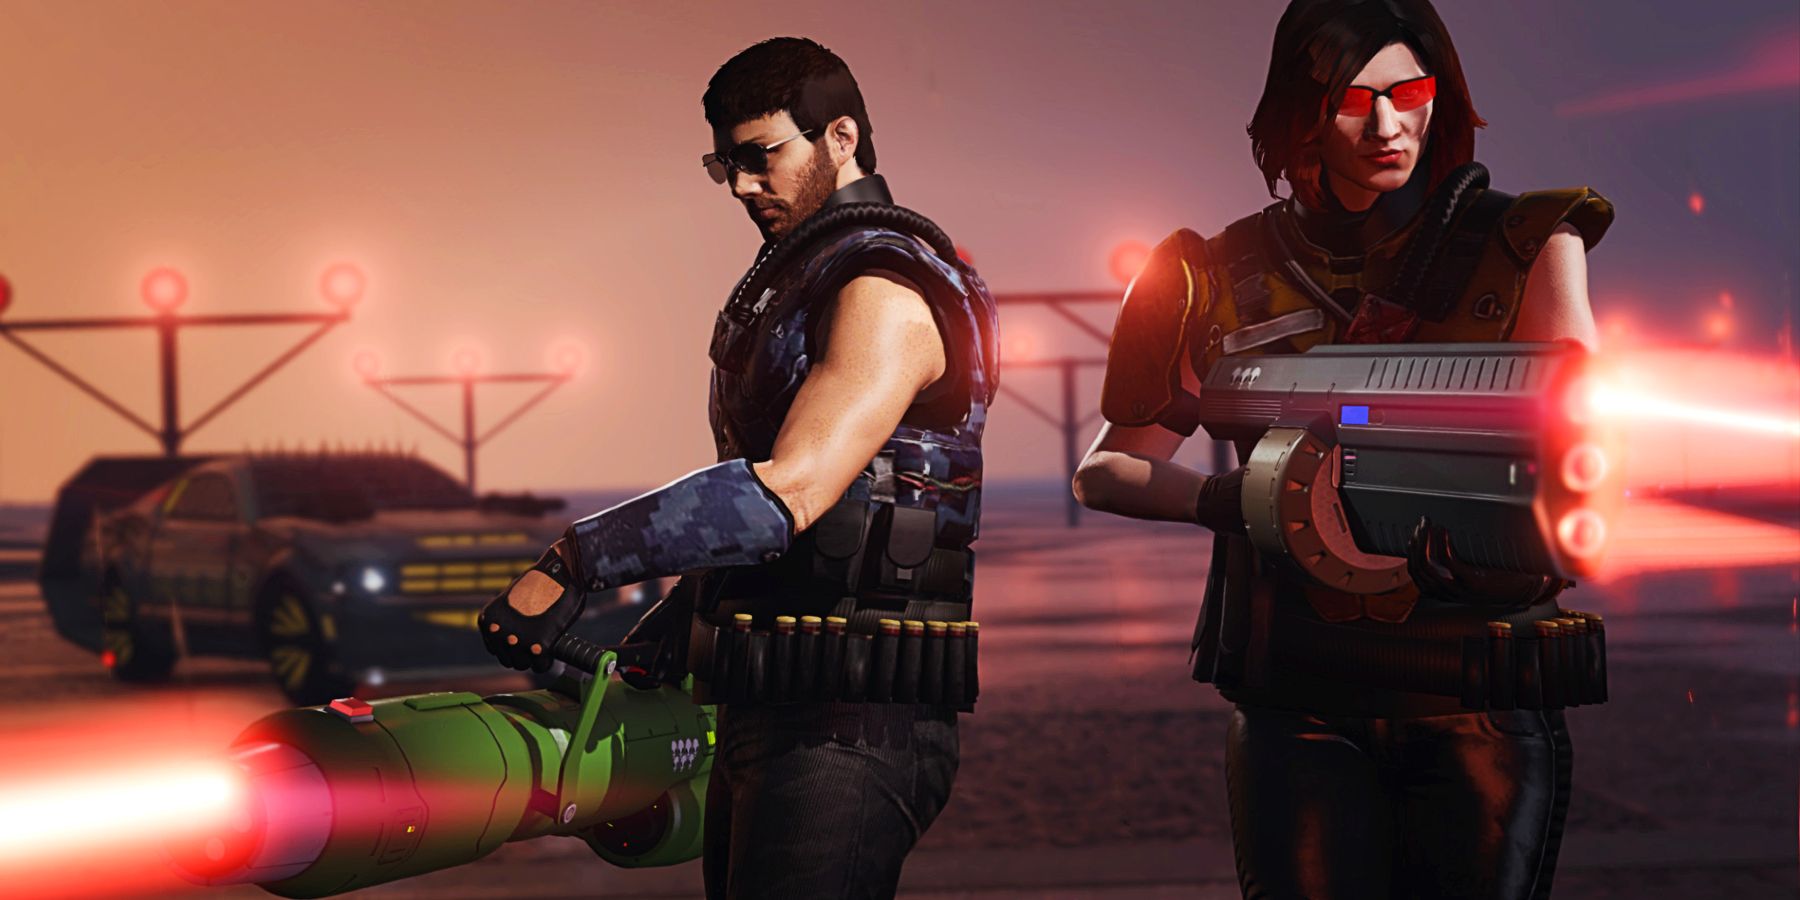 GTA Online This Week’s Limited Bonuses and Discounts